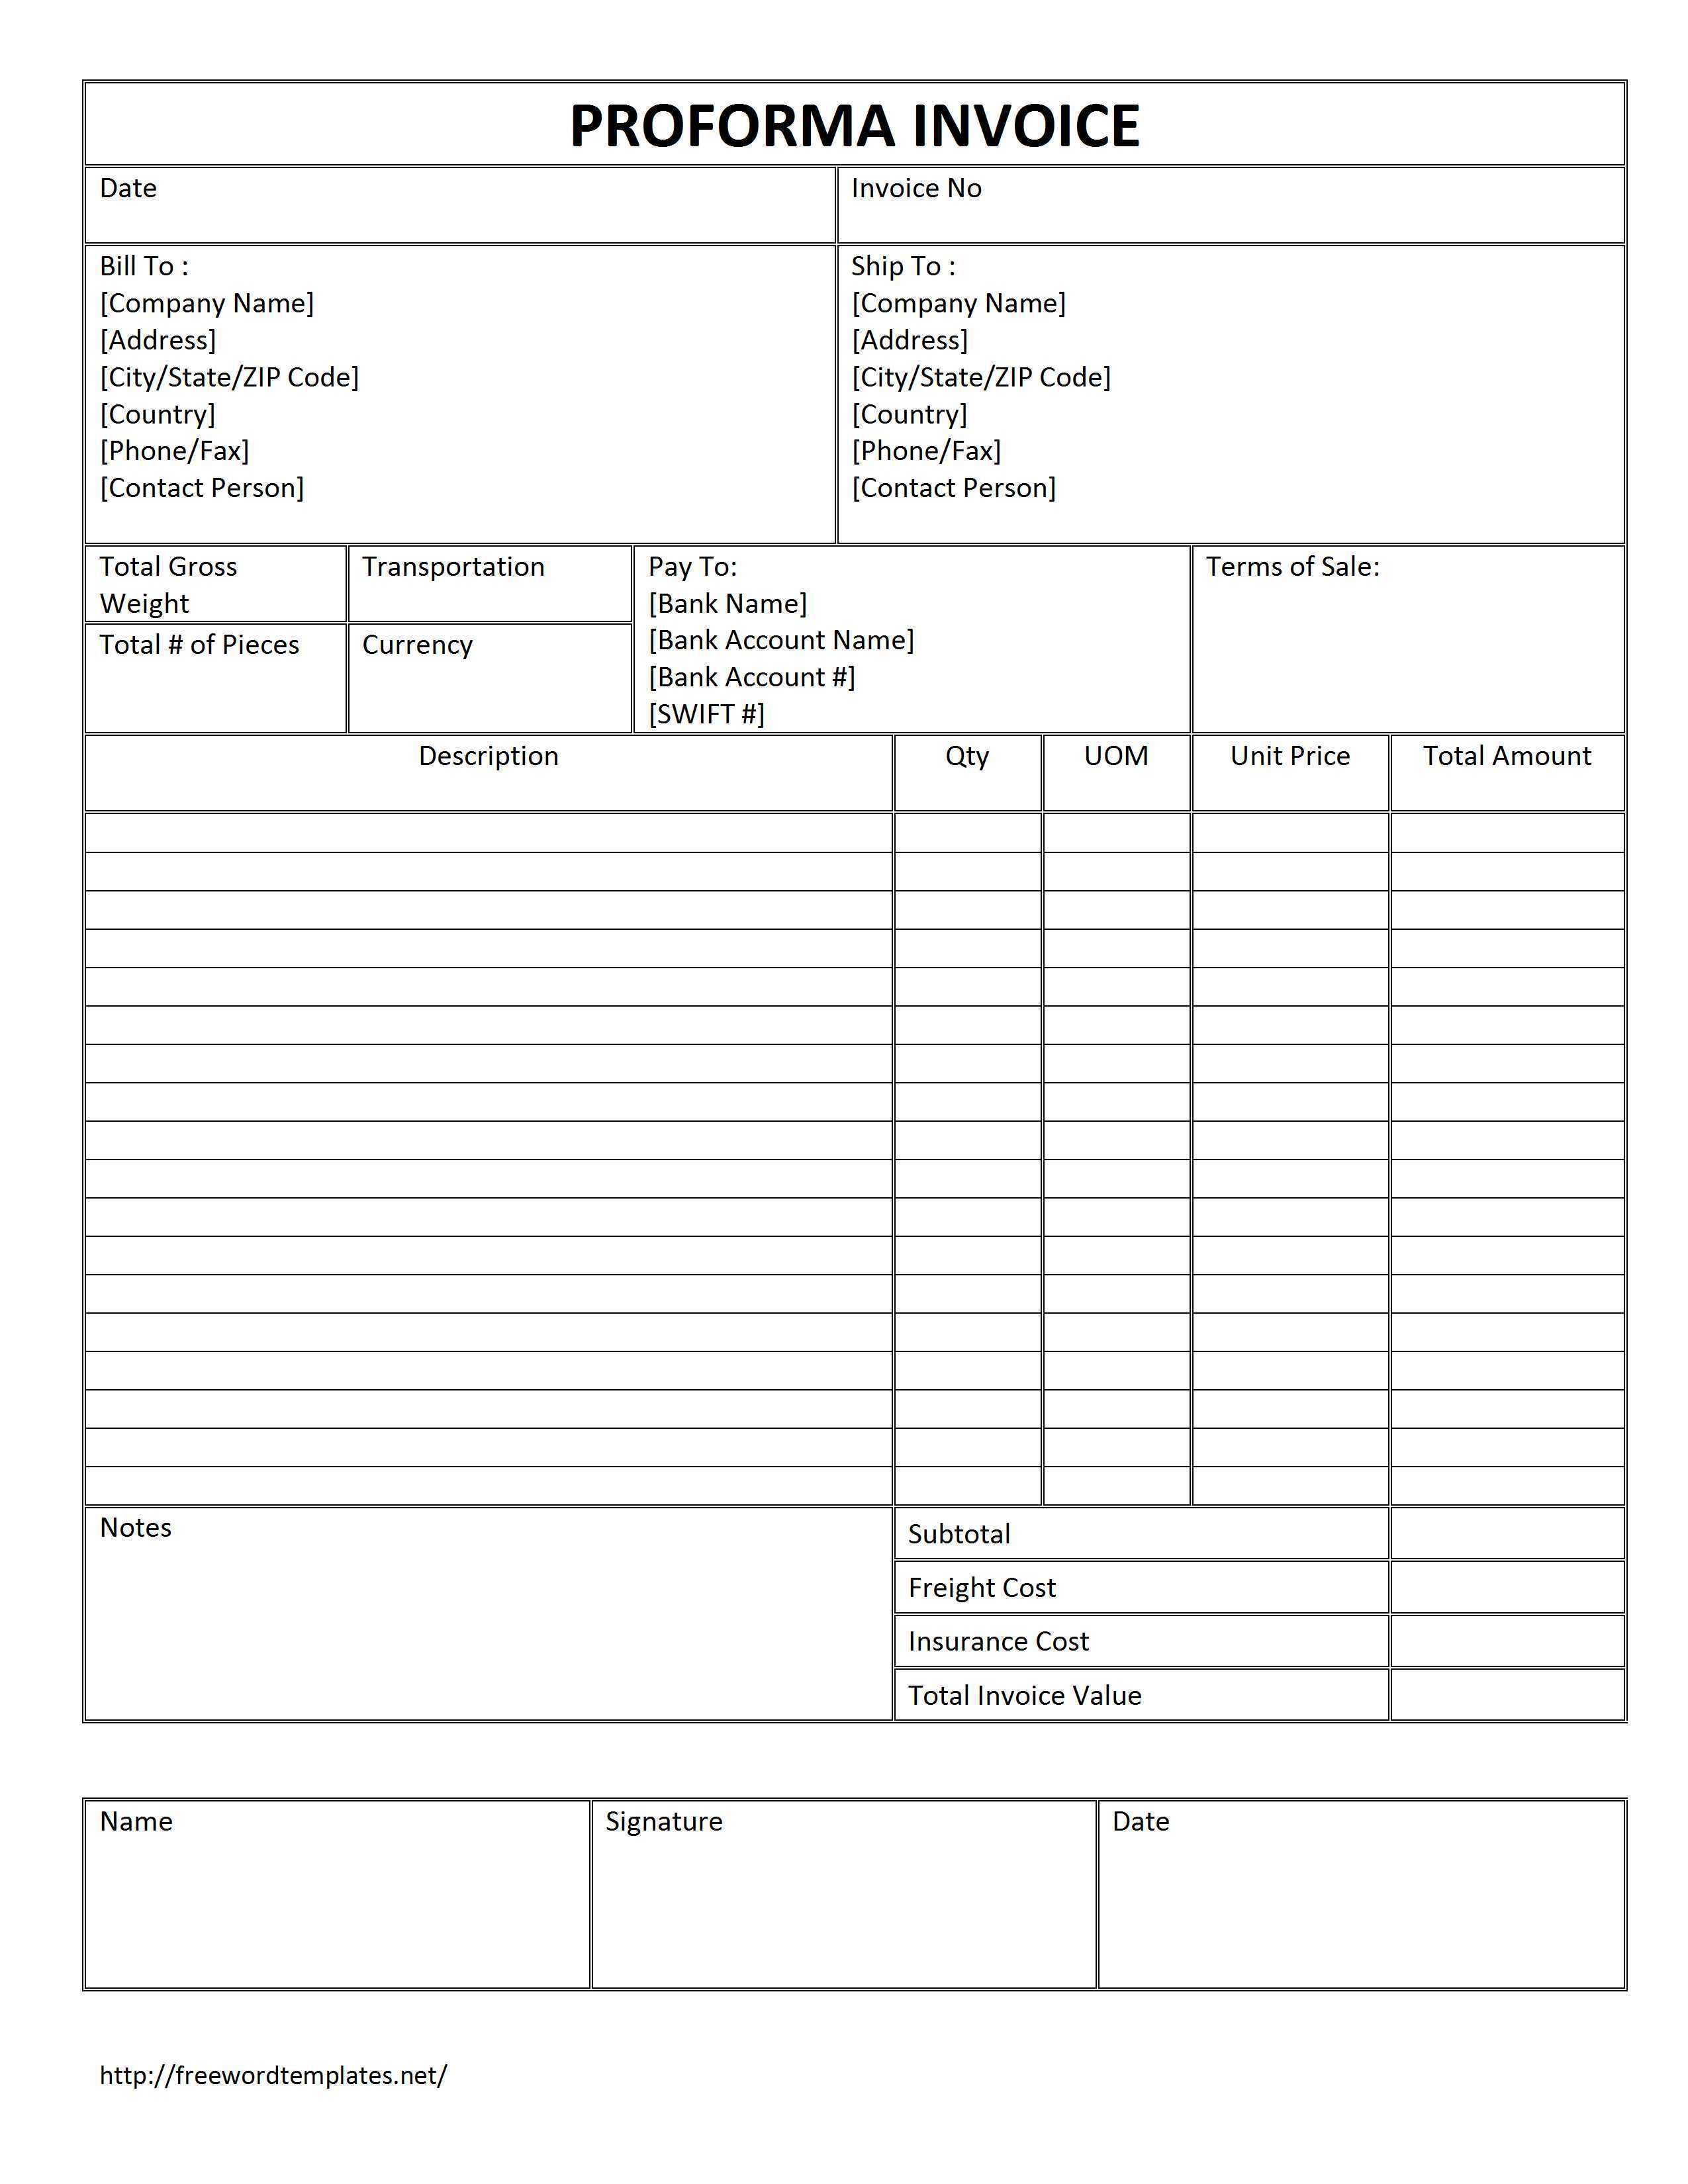 Proforma Invoice Template Free Download Free Proforma With Regard To Free Proforma Invoice Template Word